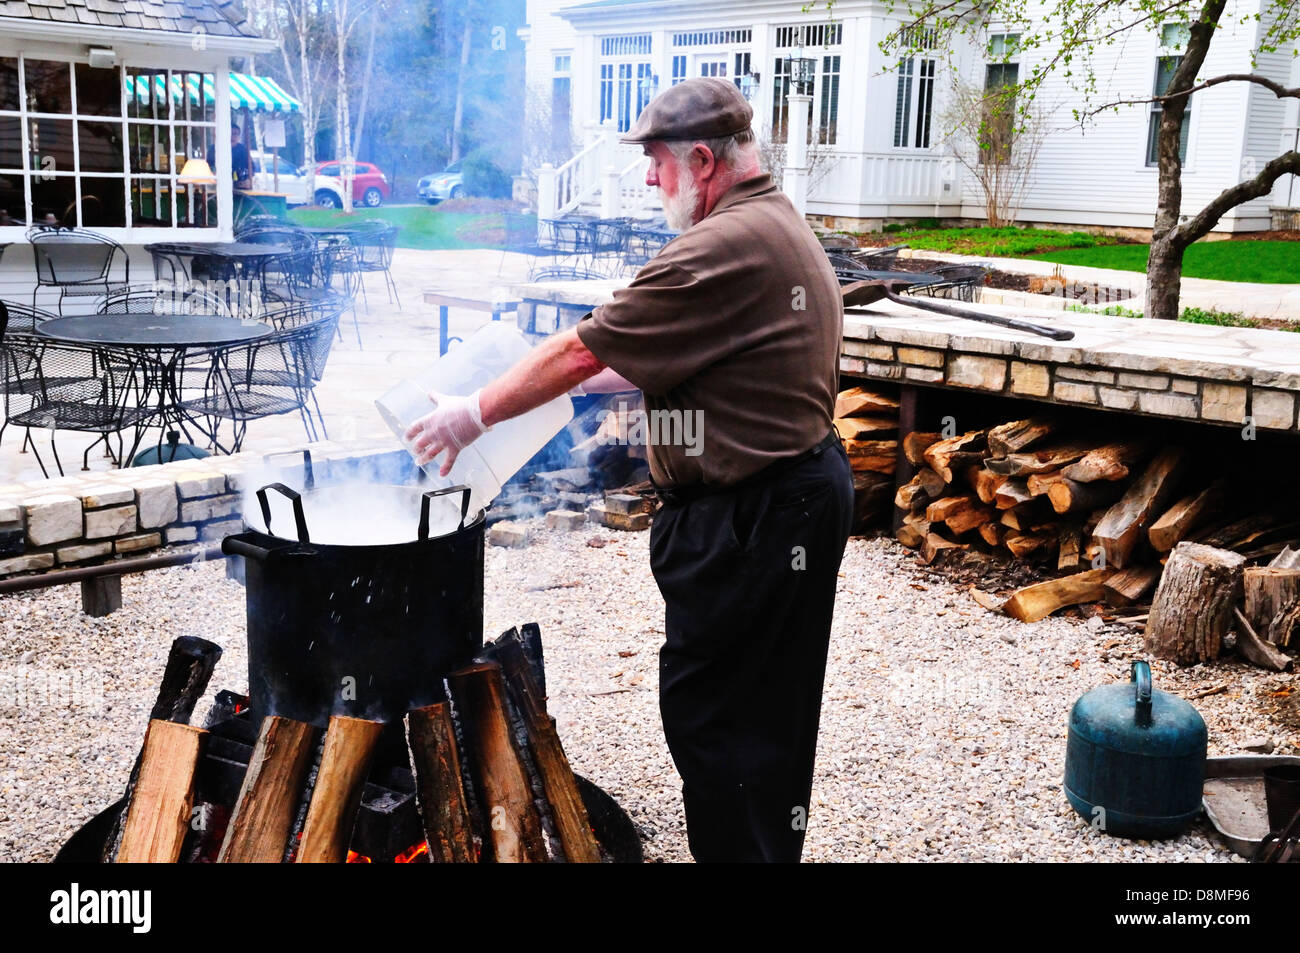 Fish is added to a large pot during a traditional Wisconsin fish boil at the White Gull Inn in Fish Creek Stock Photo